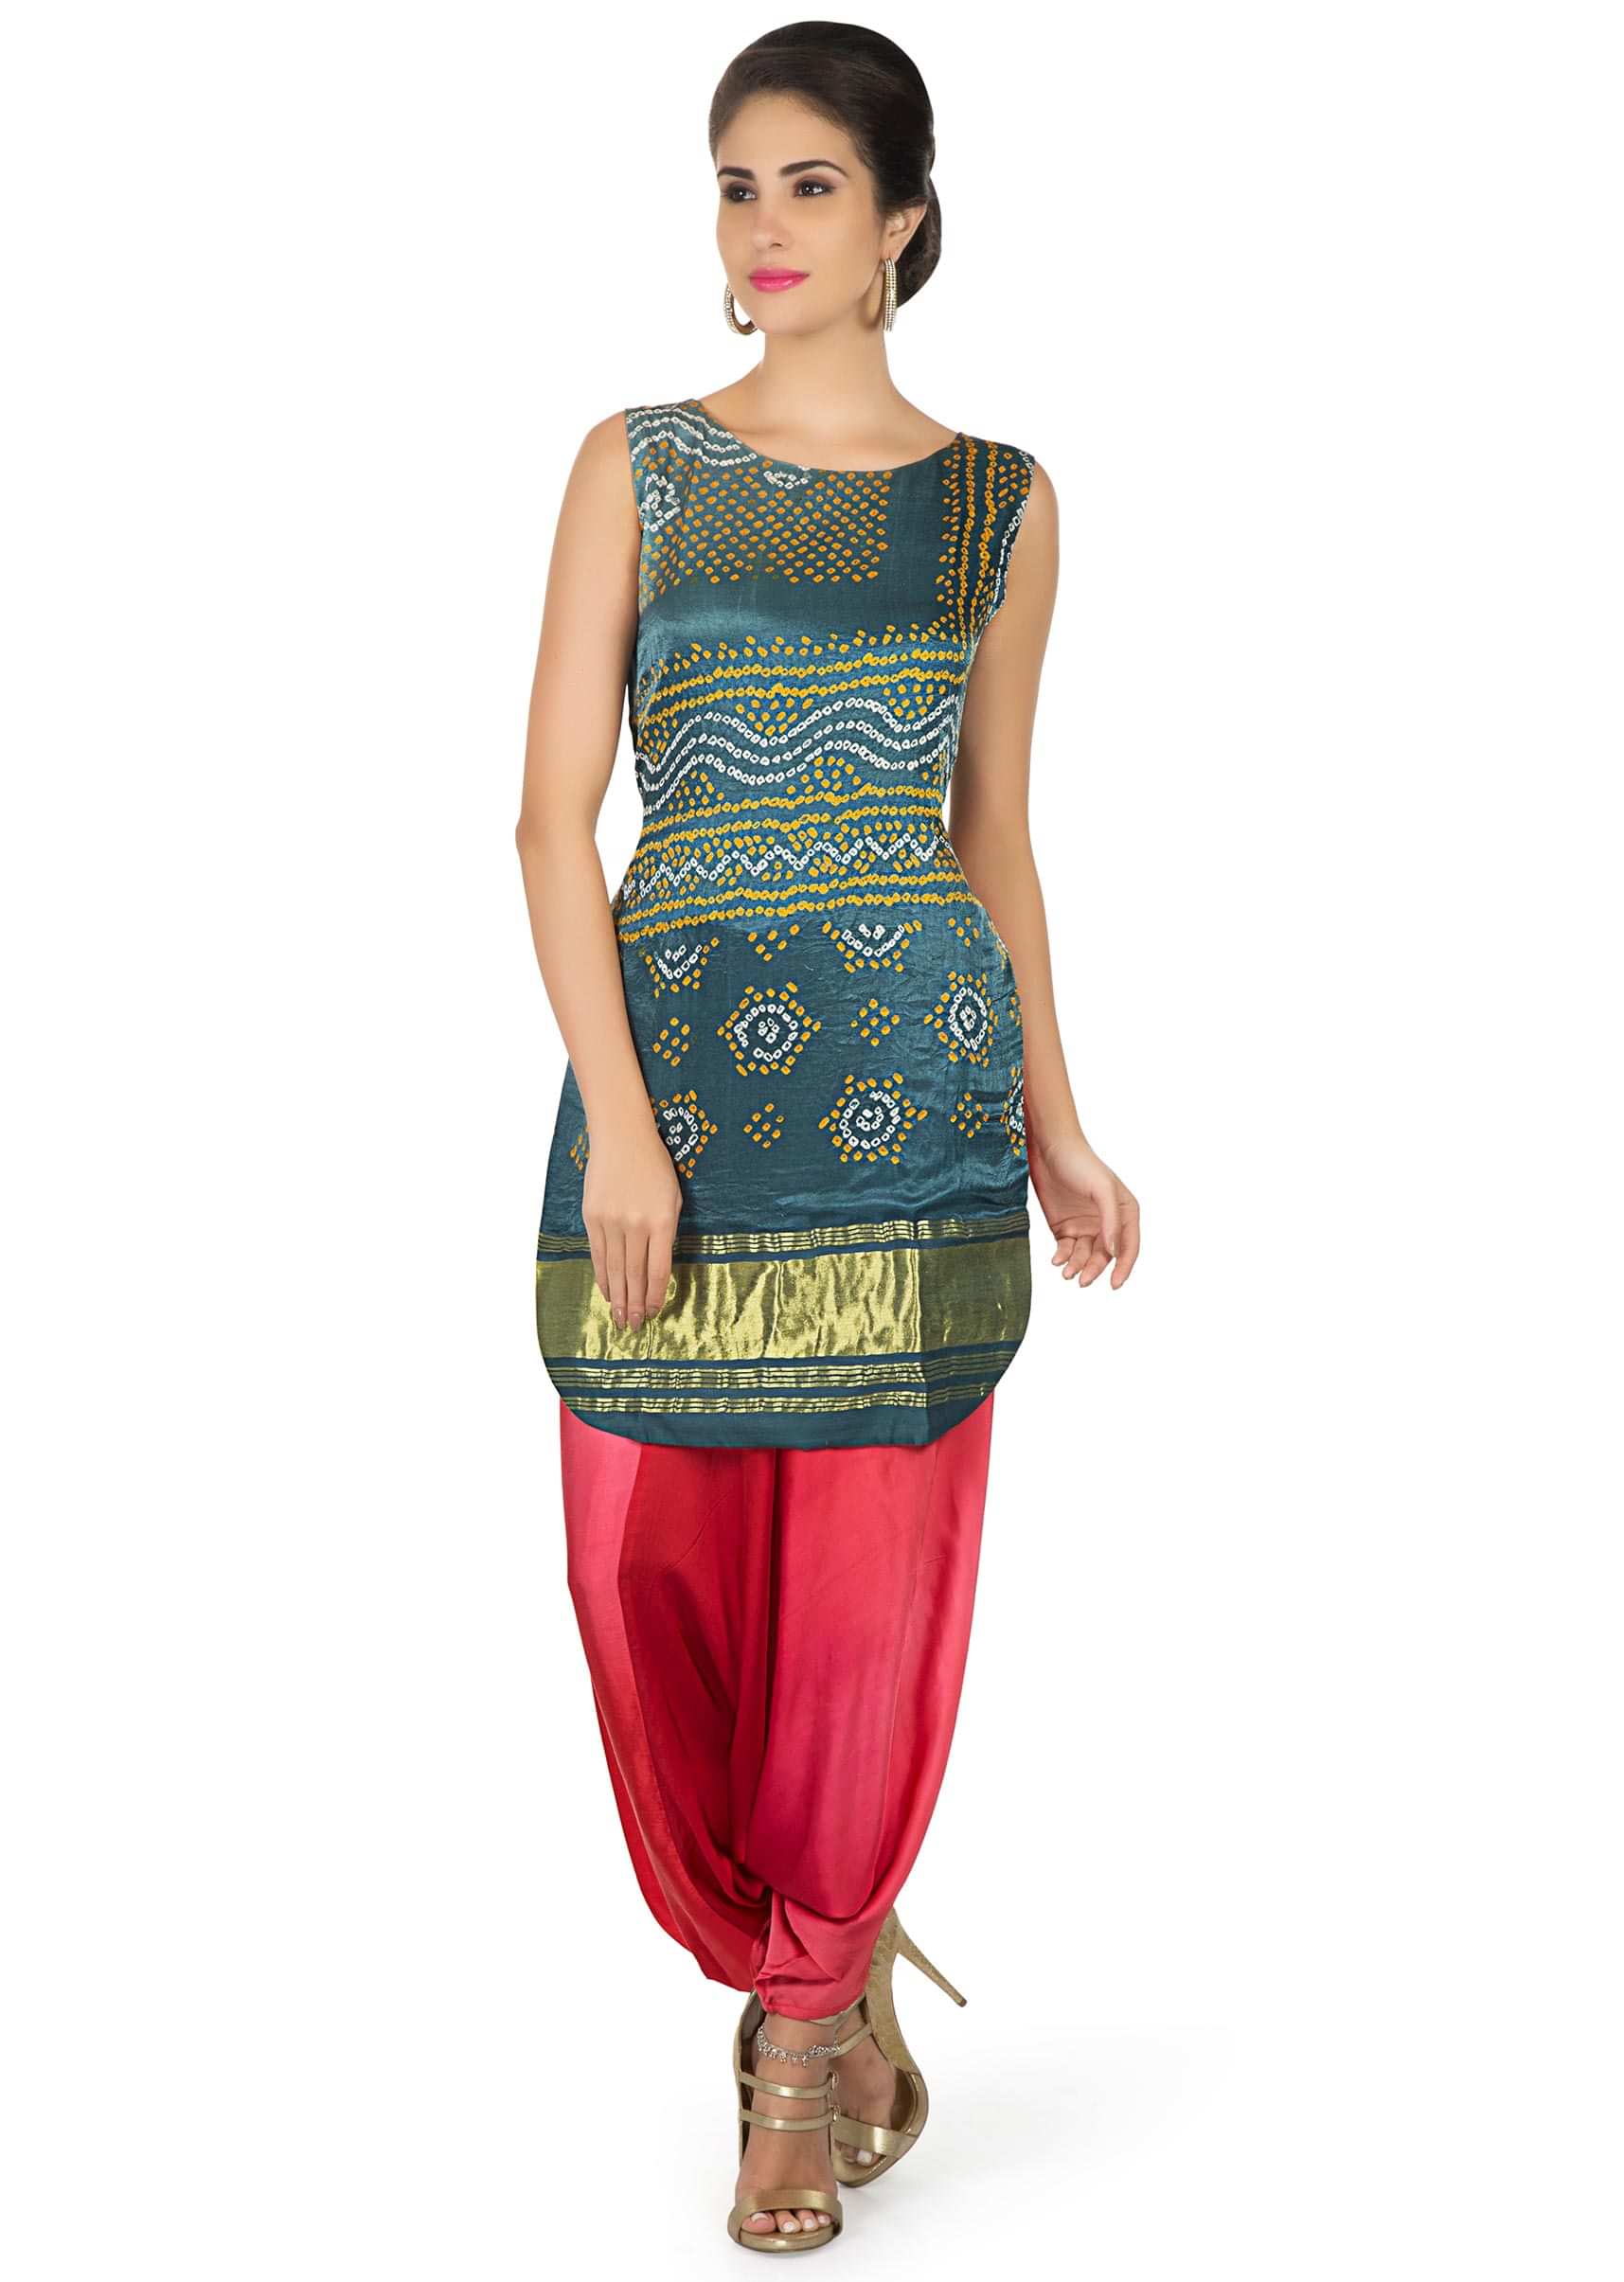 Grey satin top in bandhani print matched with Aladdin pants only on Kalki